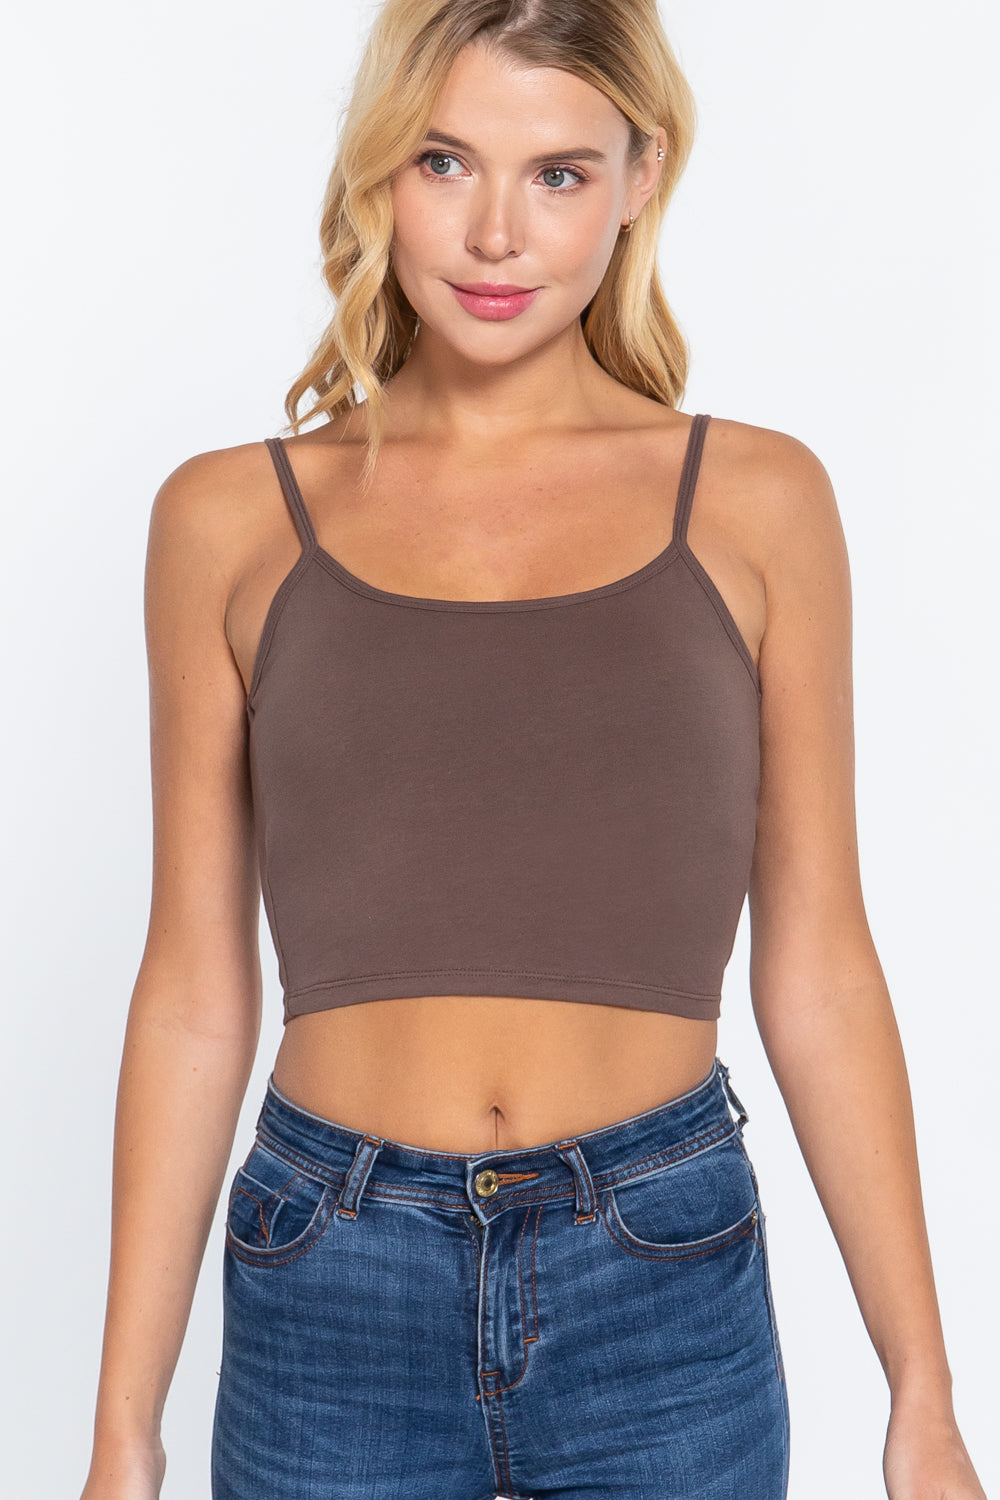 Round Neck W/removable Bra Cup Cotton Spandex Bra Top - 17 colors - Ships from The USA - women's tank top at TFC&H Co.